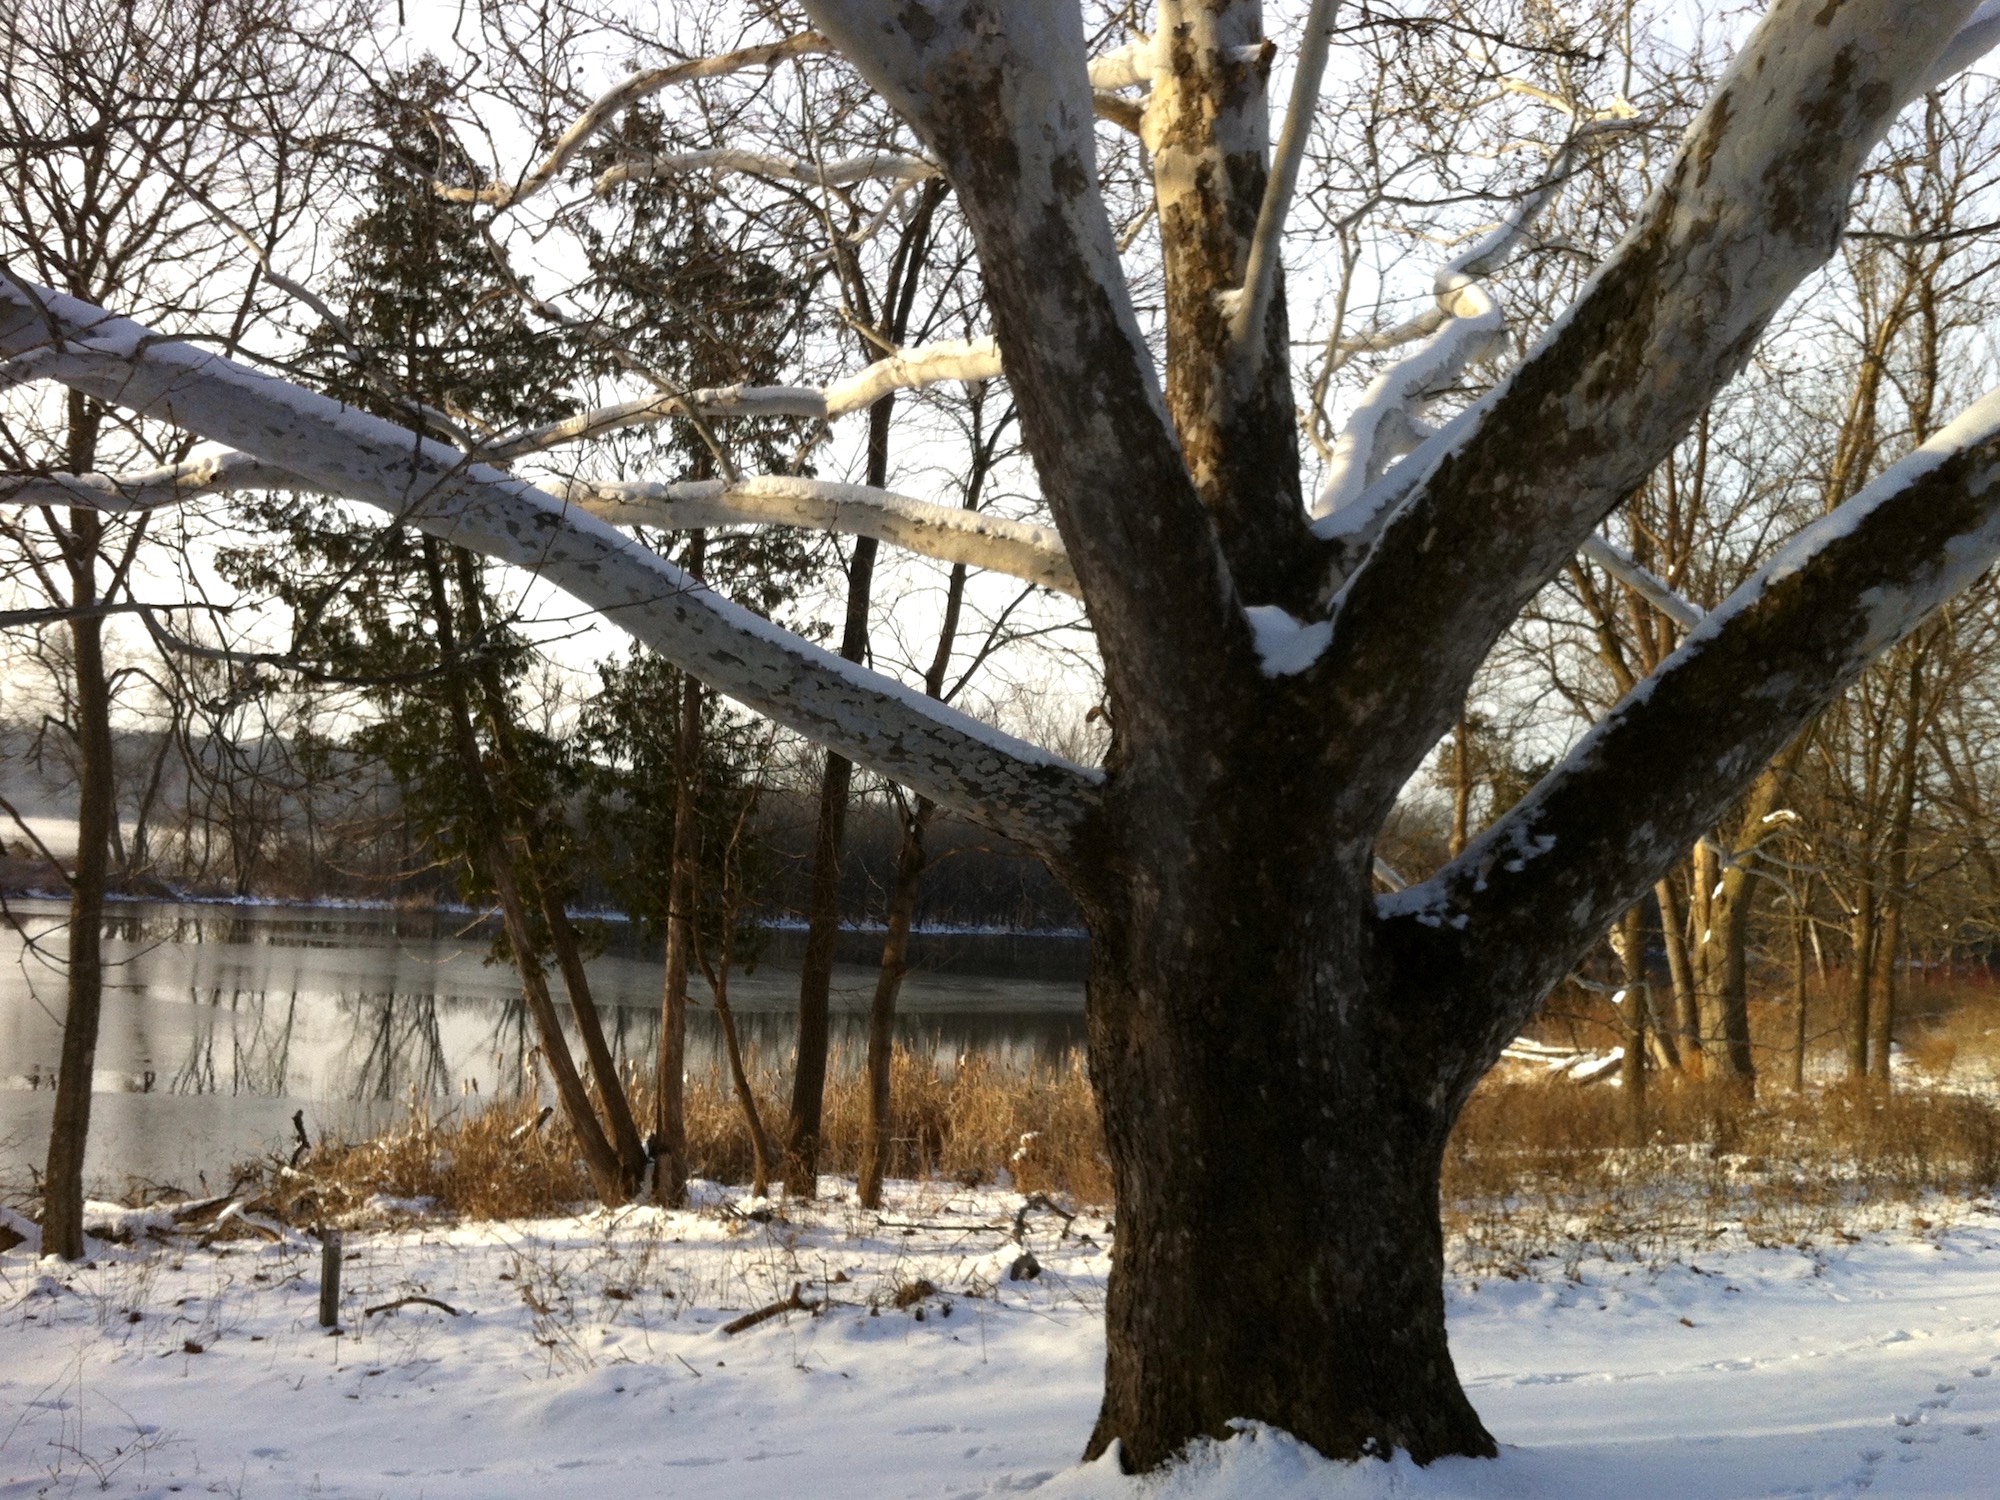 Sycamore tree between Ho-Nee-Um Pond and Arbor Drive on north shore of Lake Wingra on March 24, 2015.